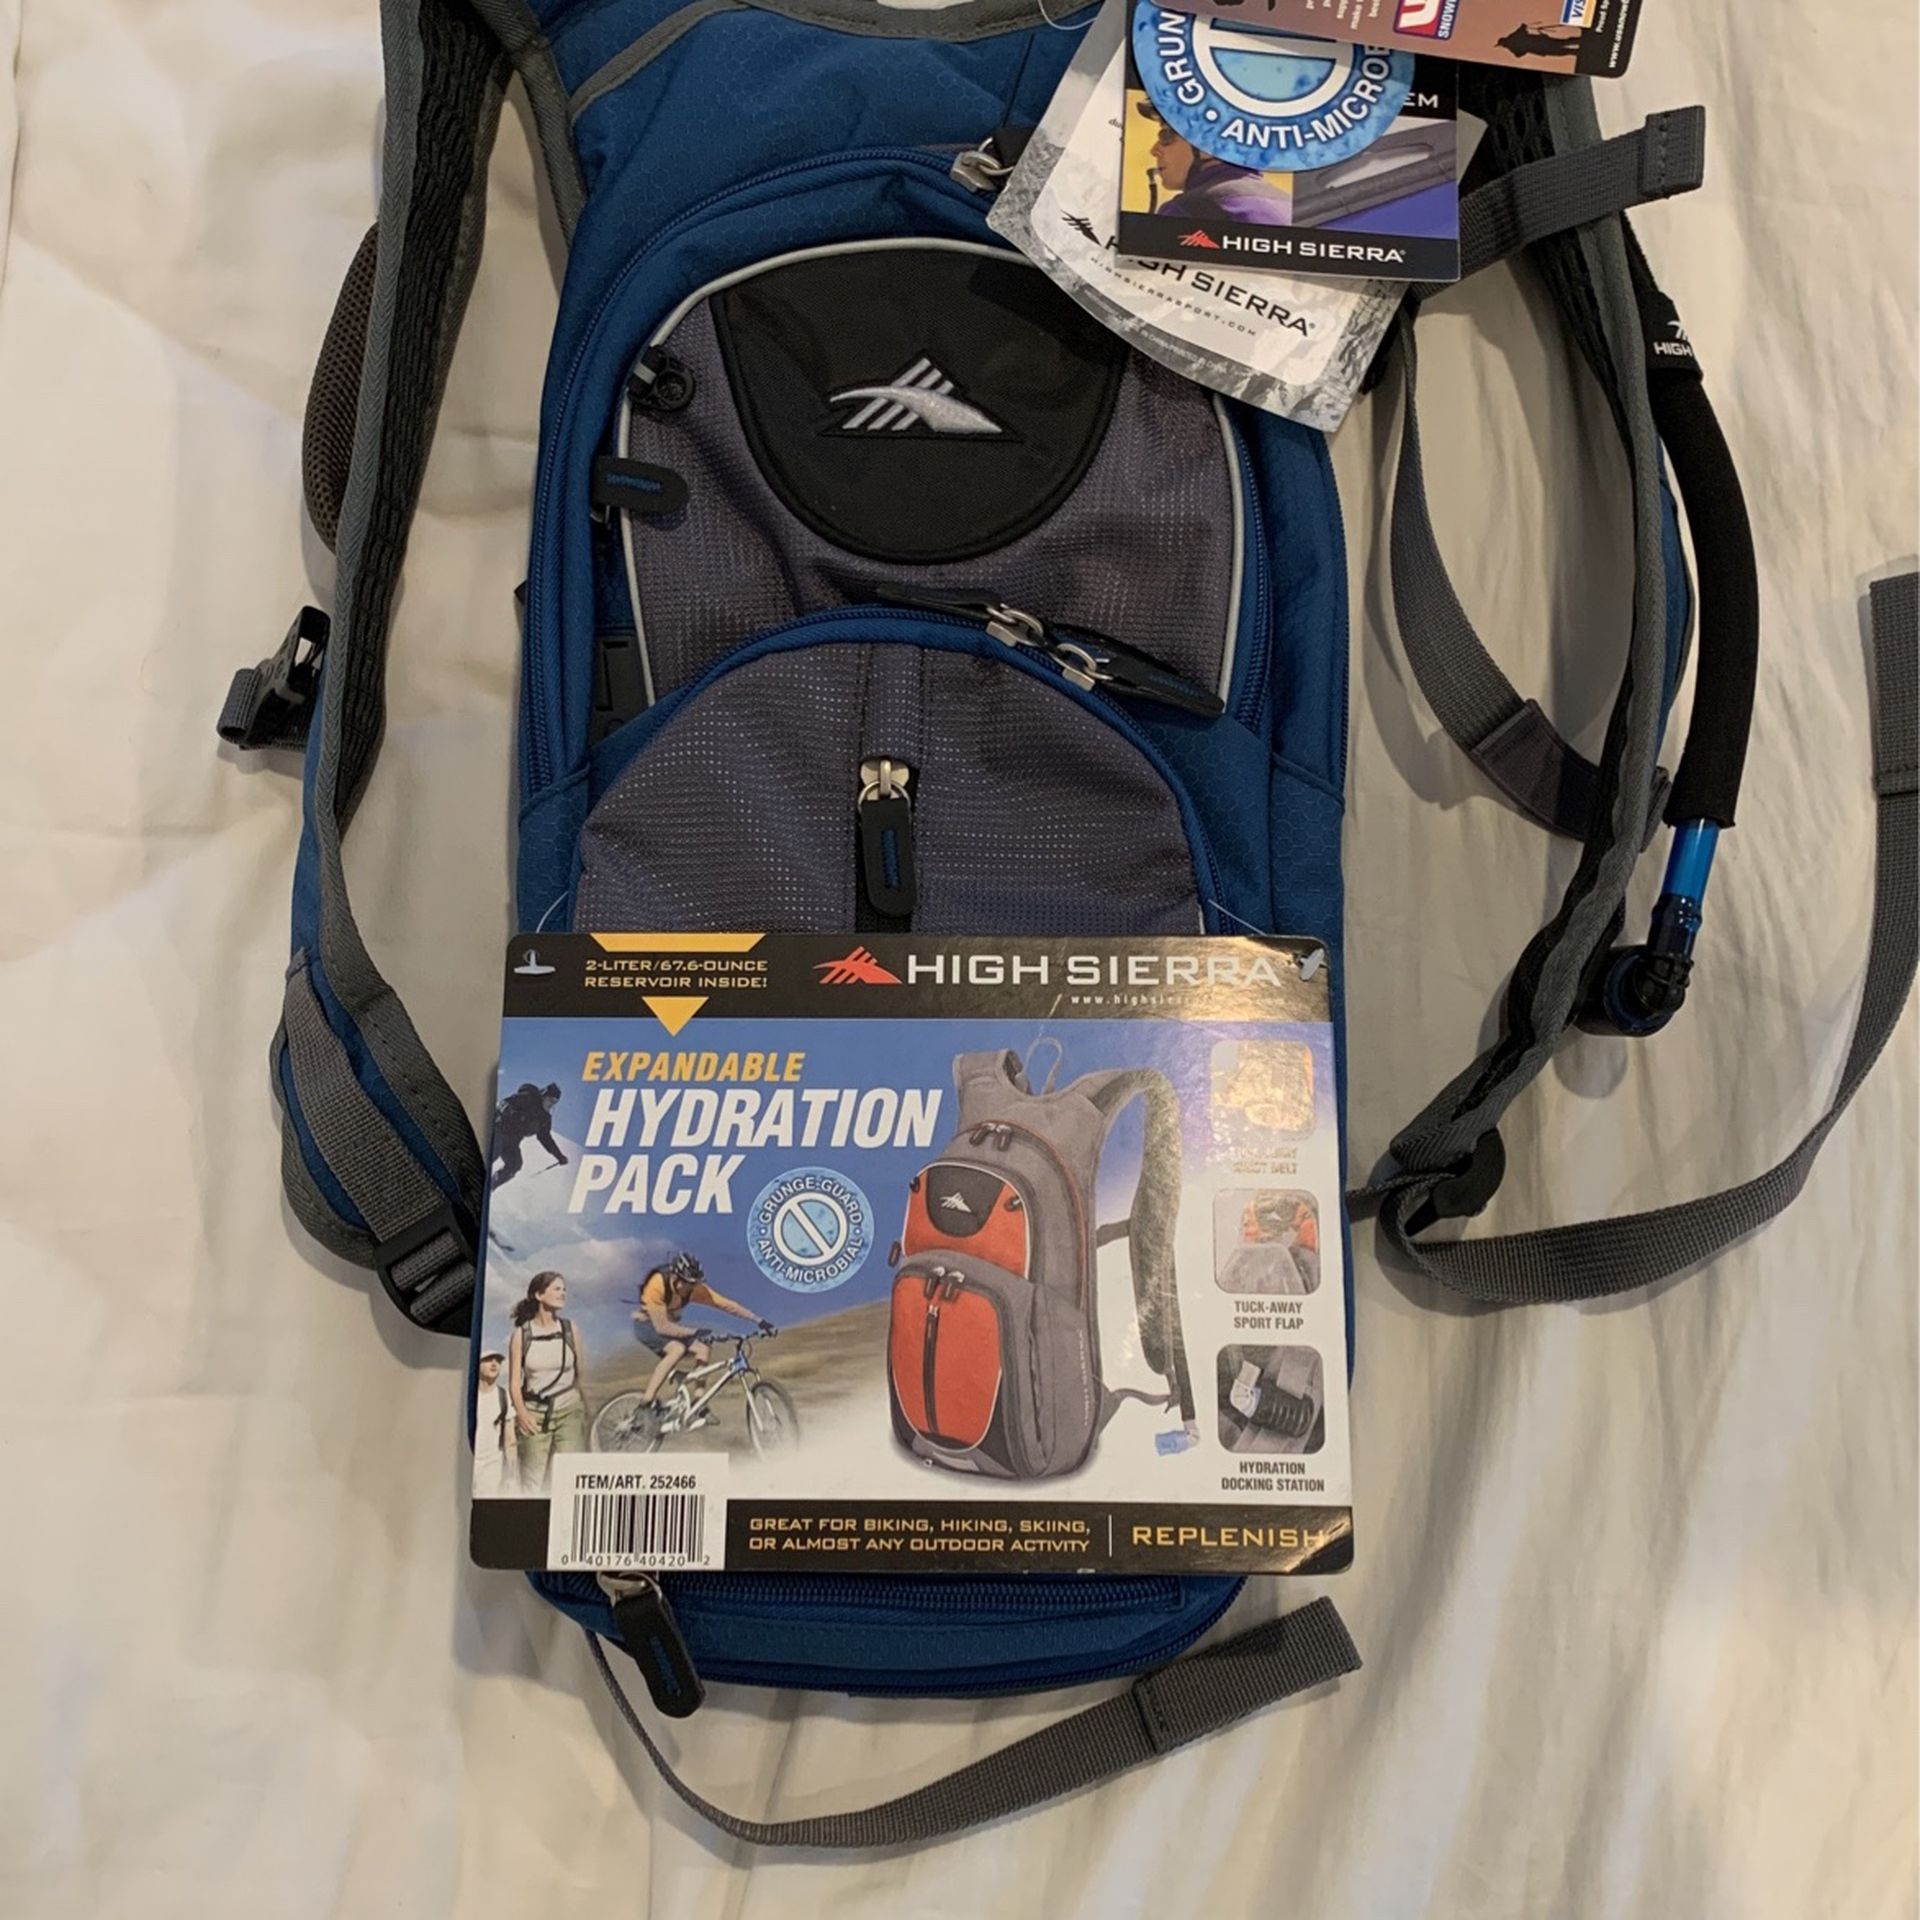 High Sierra Expandable Hydration Backpack, New With Tags, Biking, Hiking, Skiing